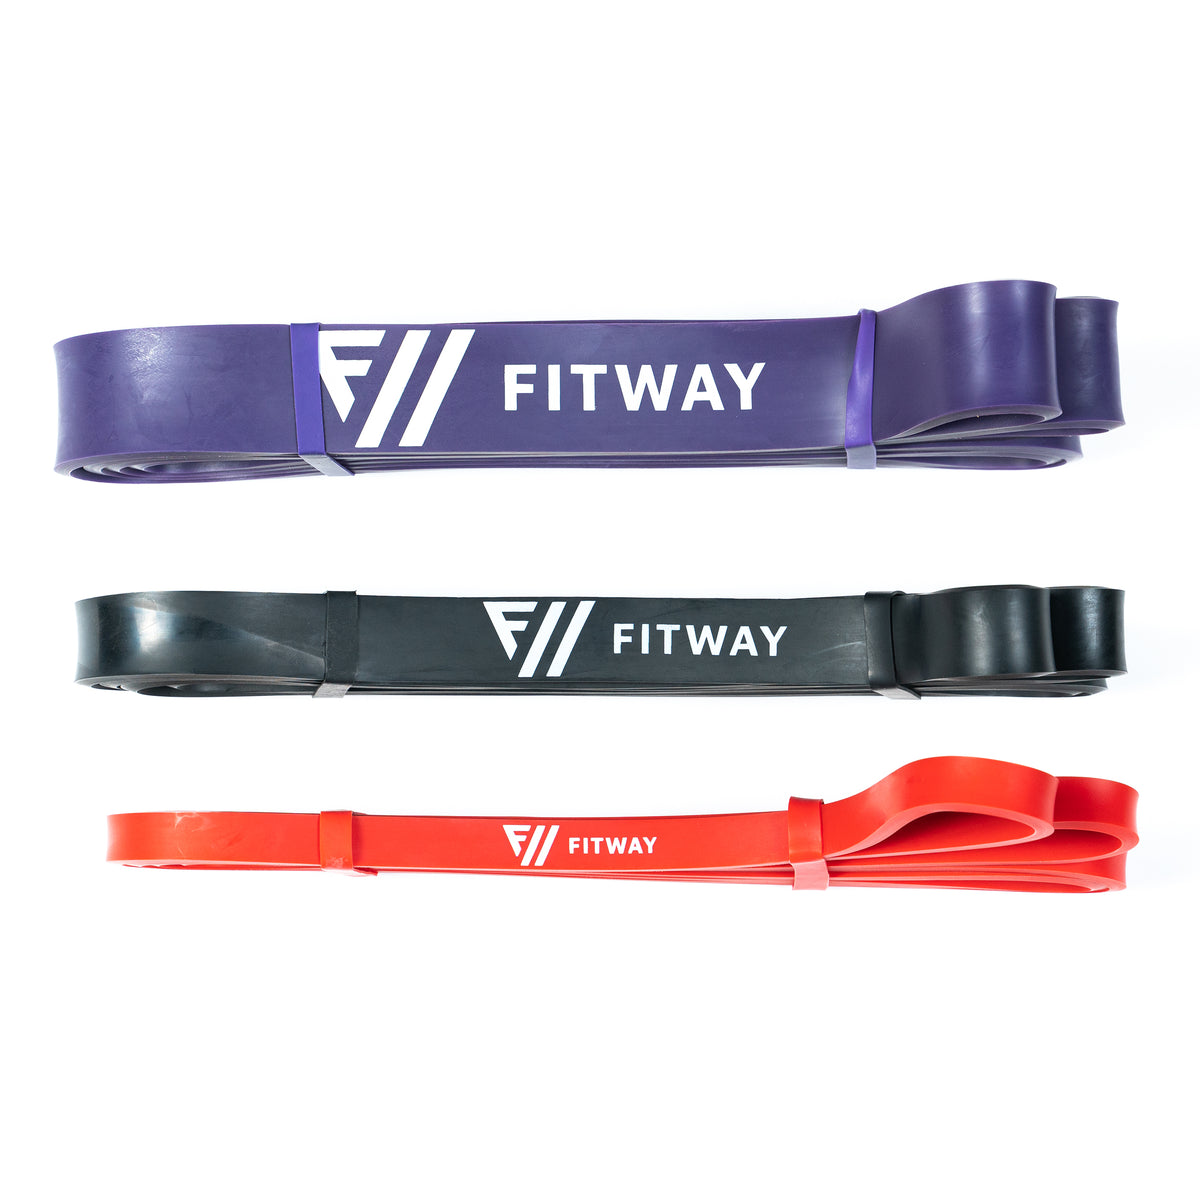 FitWay Equip. Heavy Duty Resistance Band Set 